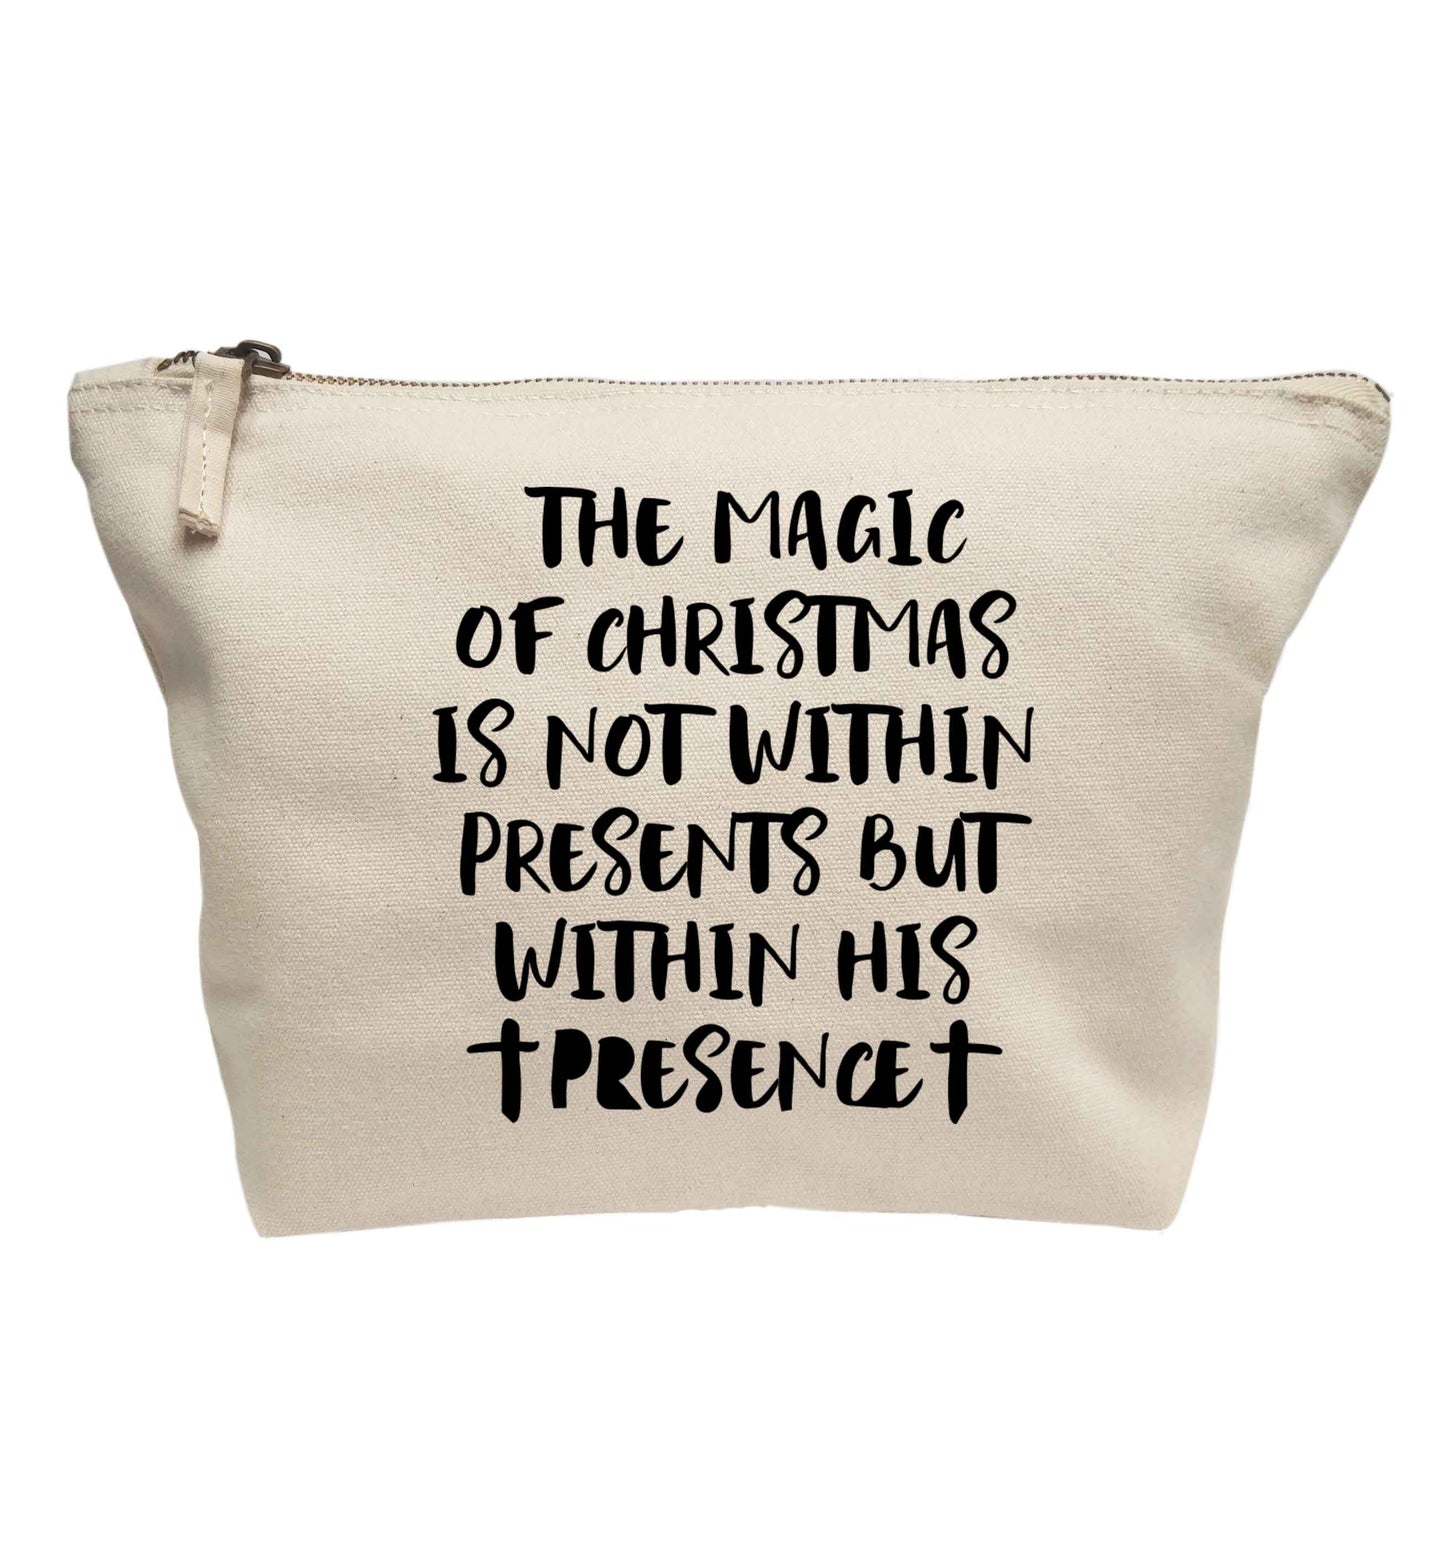 The magic of Christmas is not within presents but within his presence | makeup / wash bag